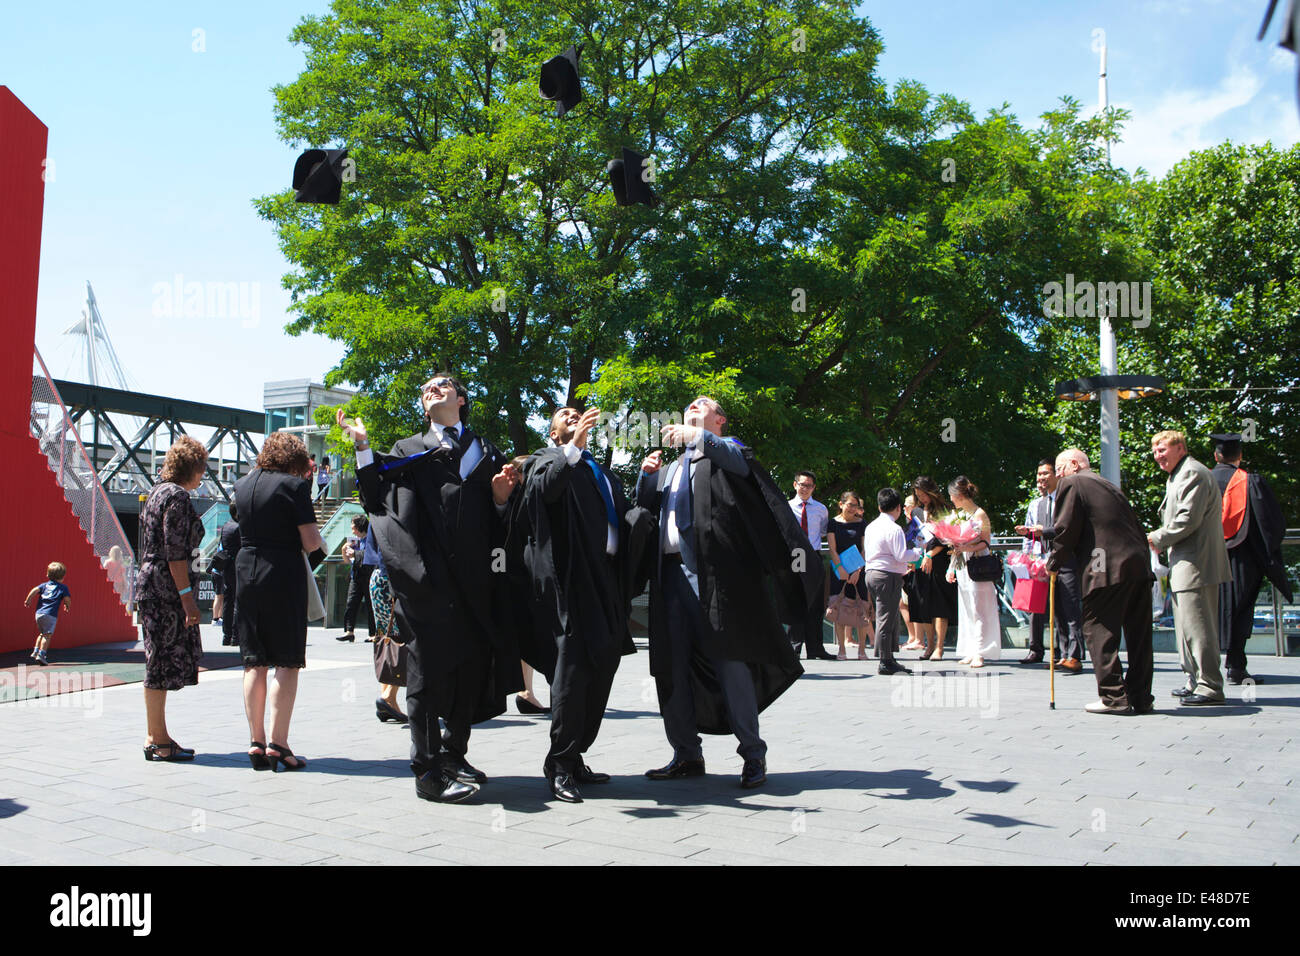 Graduation day: graduates wearing black gowns throw their caps in the air, Southbank, London, UK. Stock Photo